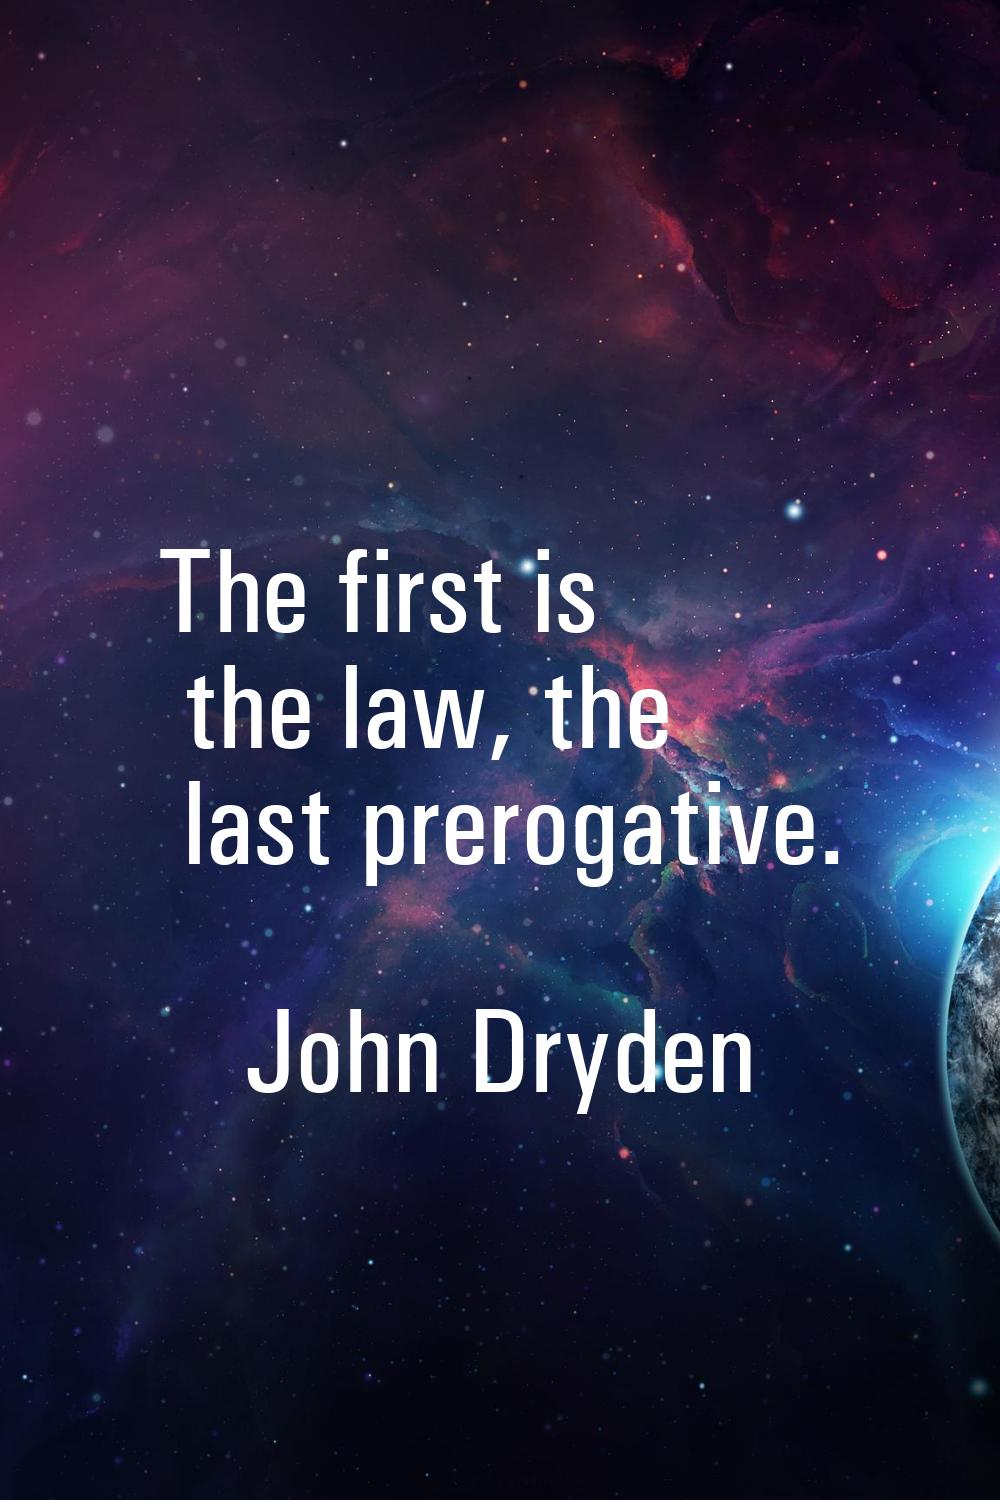 The first is the law, the last prerogative.